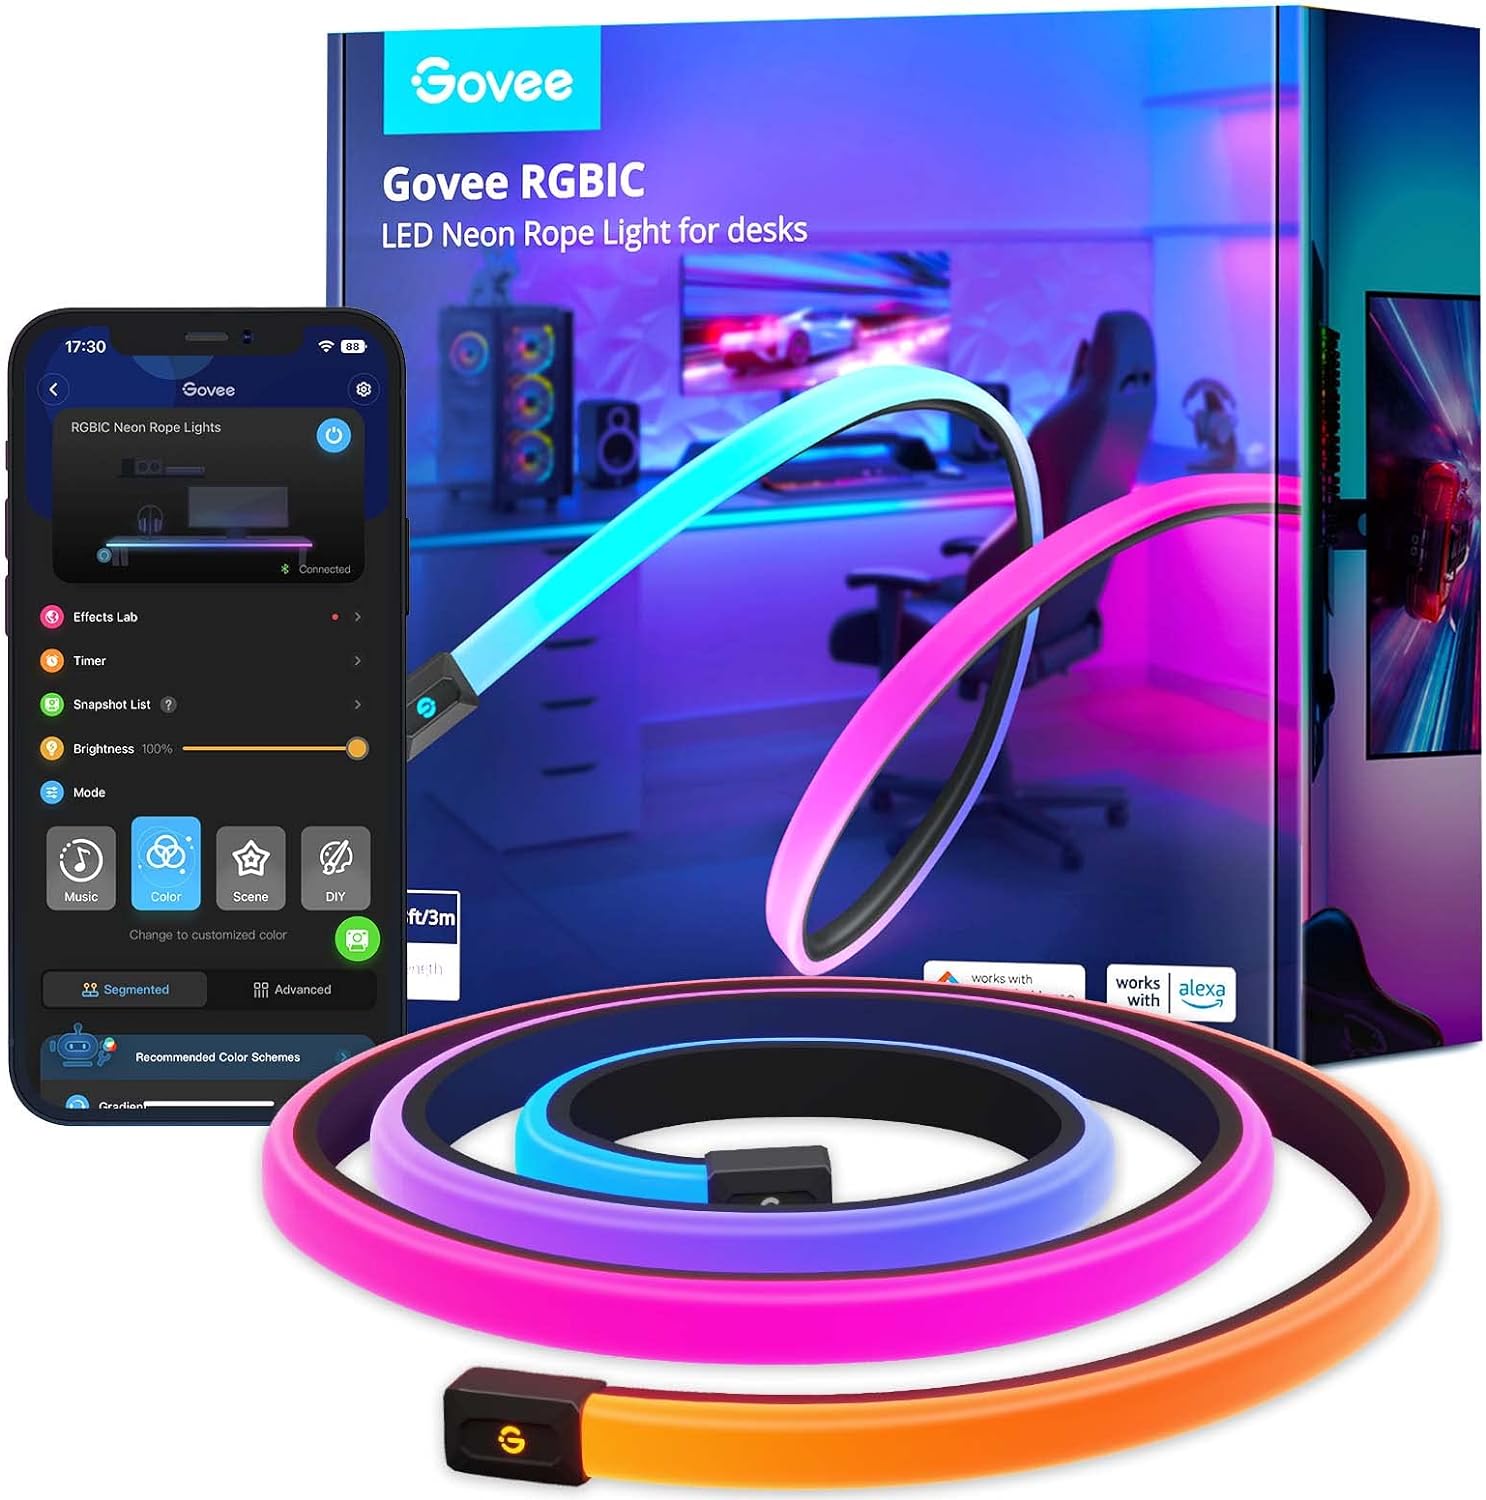 Govee RGBIC Gaming Lights, 10ft Neon Rope Lights Soft Lighting for Gaming Desks, LED Strip Lights Syncing with Razer Chroma, Support Cutting, Smart App Control, Music Sync, Adapter (Only 2.4G Wi-Fi)